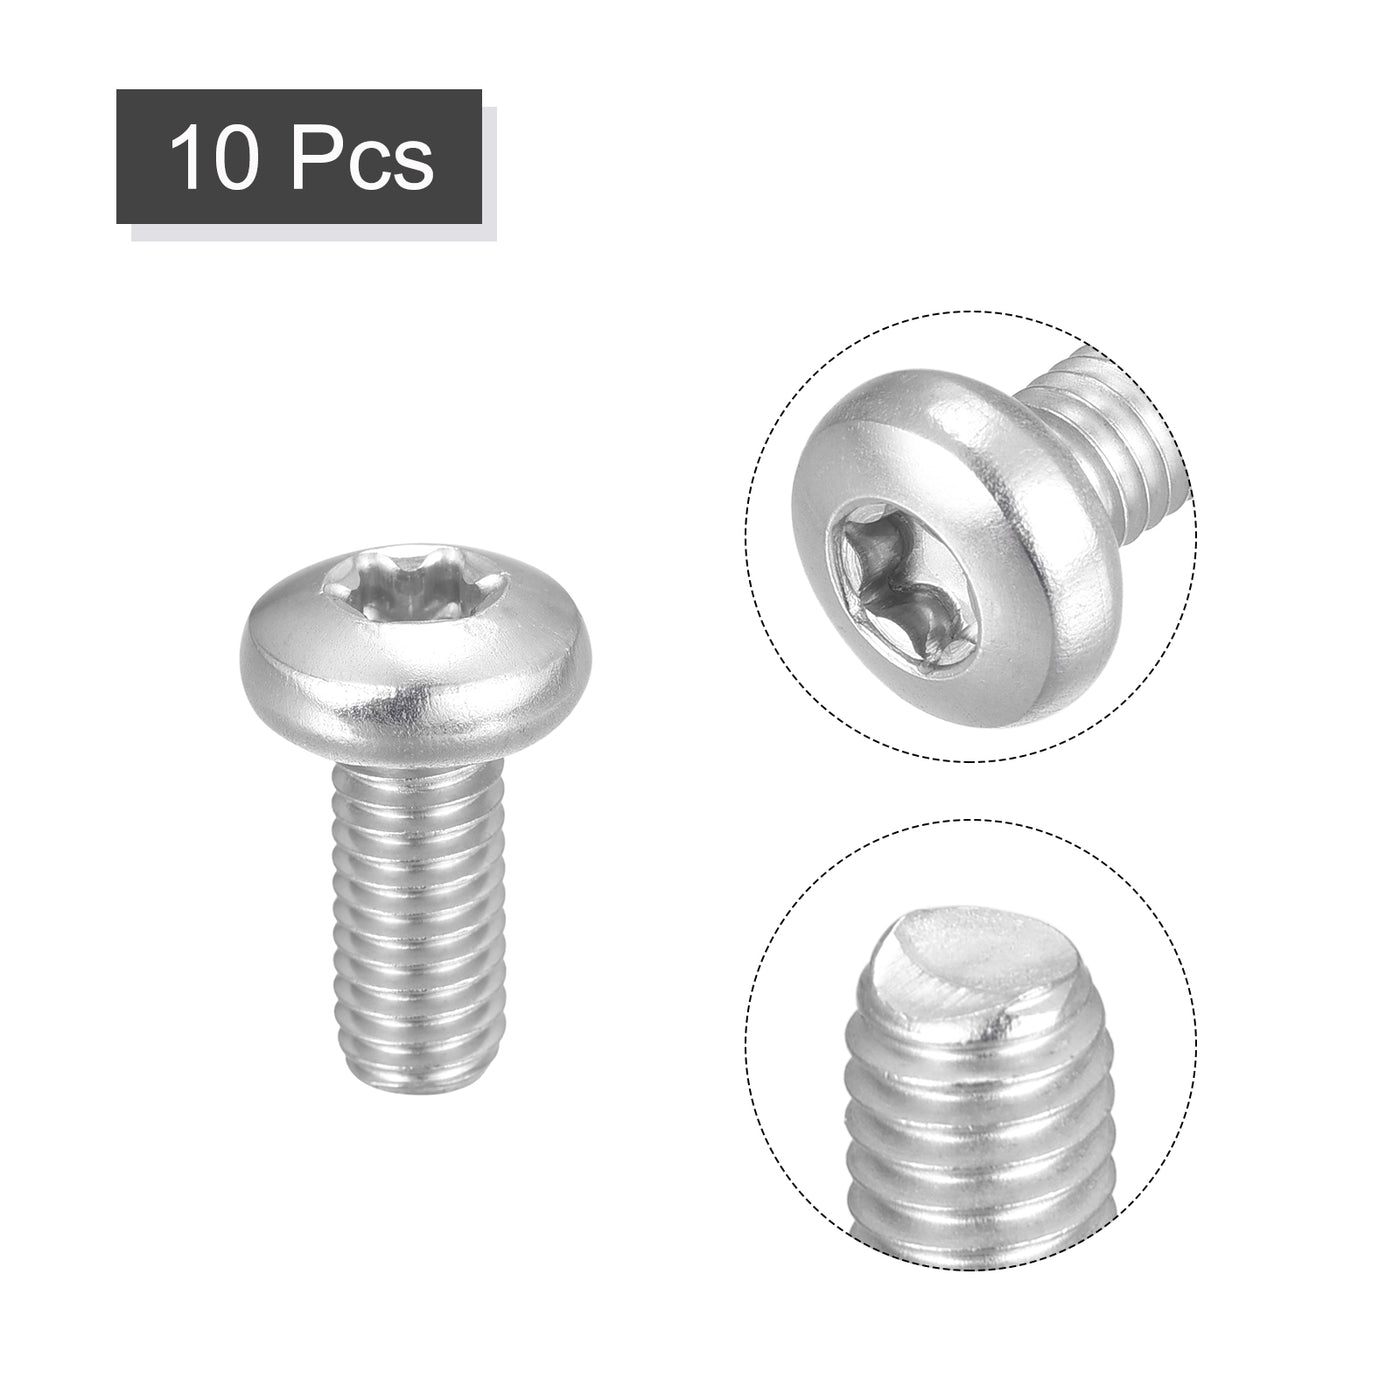 uxcell Uxcell M6x14mm Torx Security Machine Screws, 10pcs 316 Stainless Steel Pan Head Screw